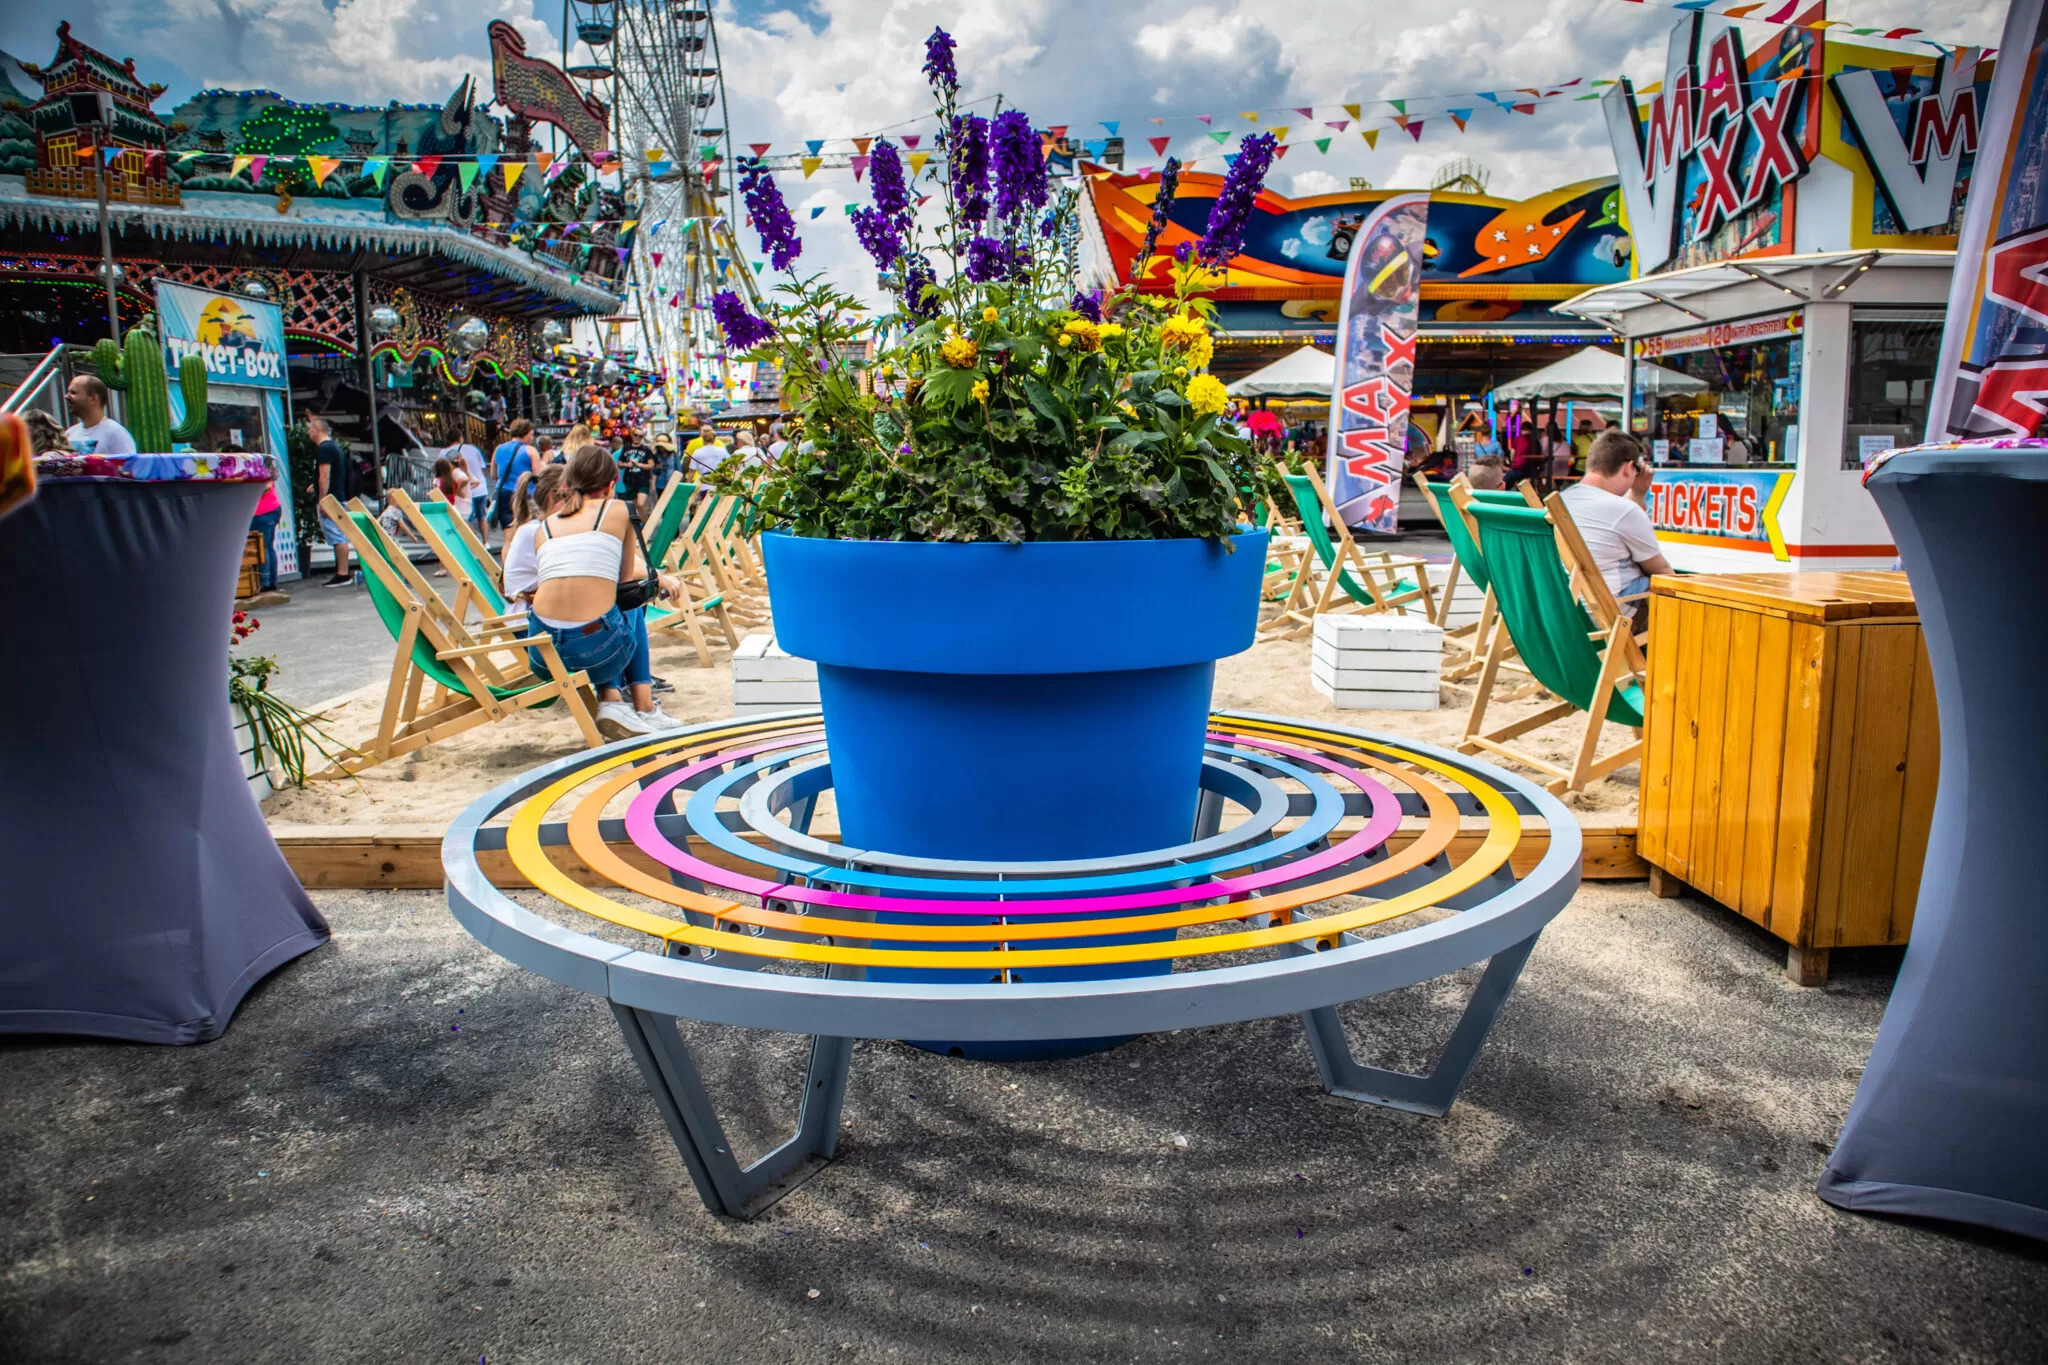 Colorful Zebra bench invites people to sit